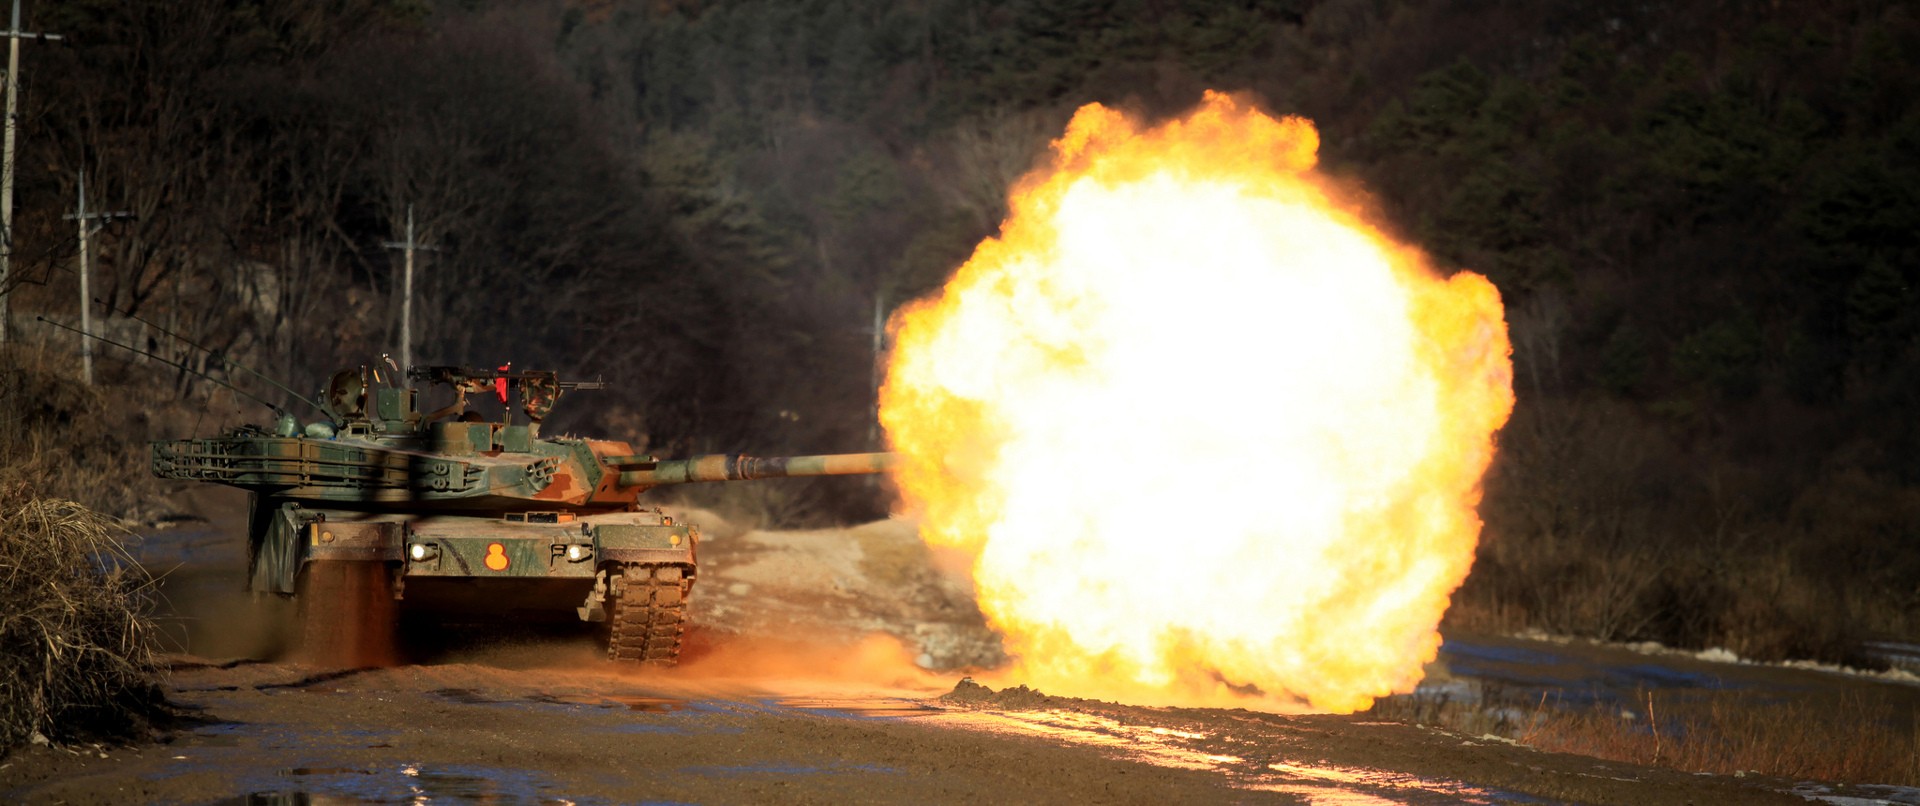 General 1920x806 military tank Republic of Korea Armed Forces vehicle military vehicle K1 88-Tank ROK Army shooting blast South Korea 2014 (Year) bright